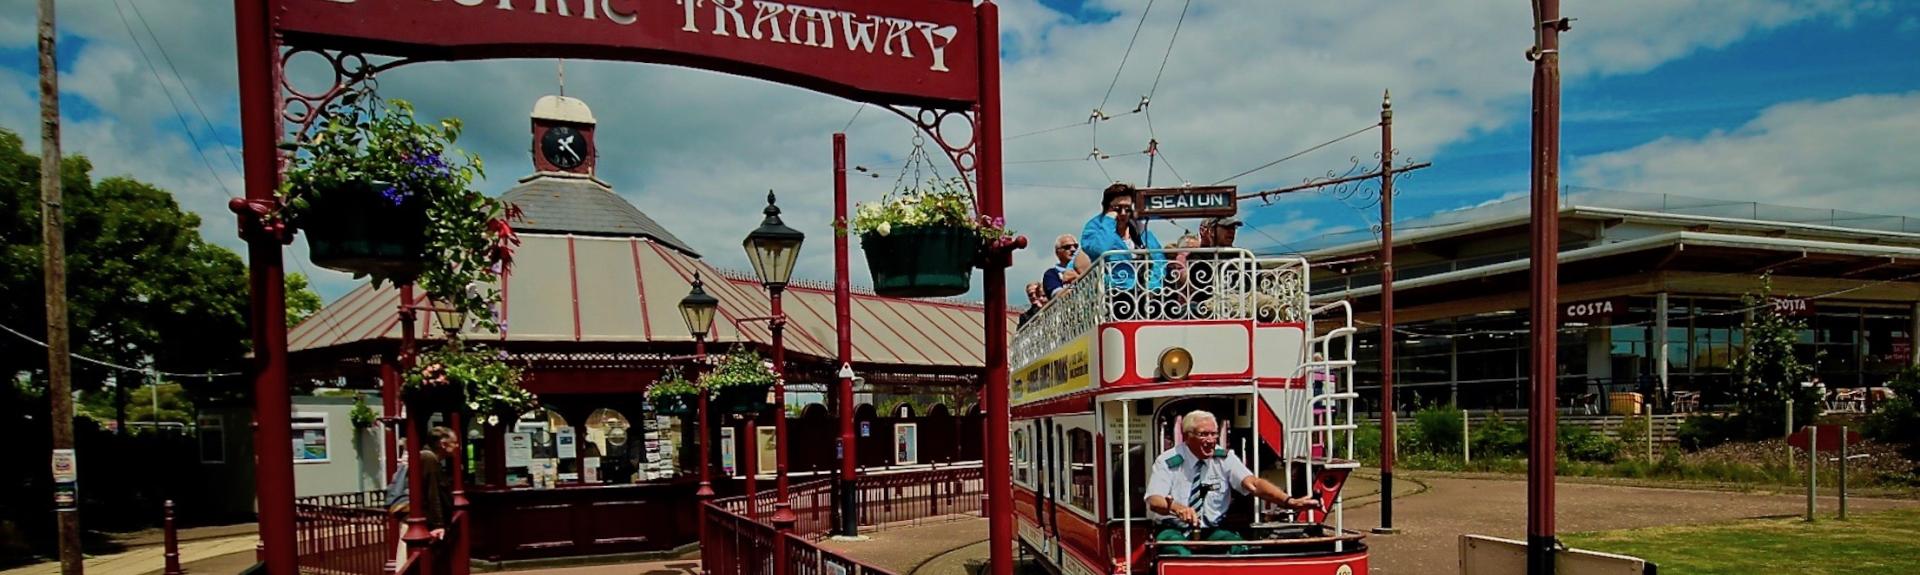 This popular attraction runs alongside the River Axe between Seaton and Colyton.